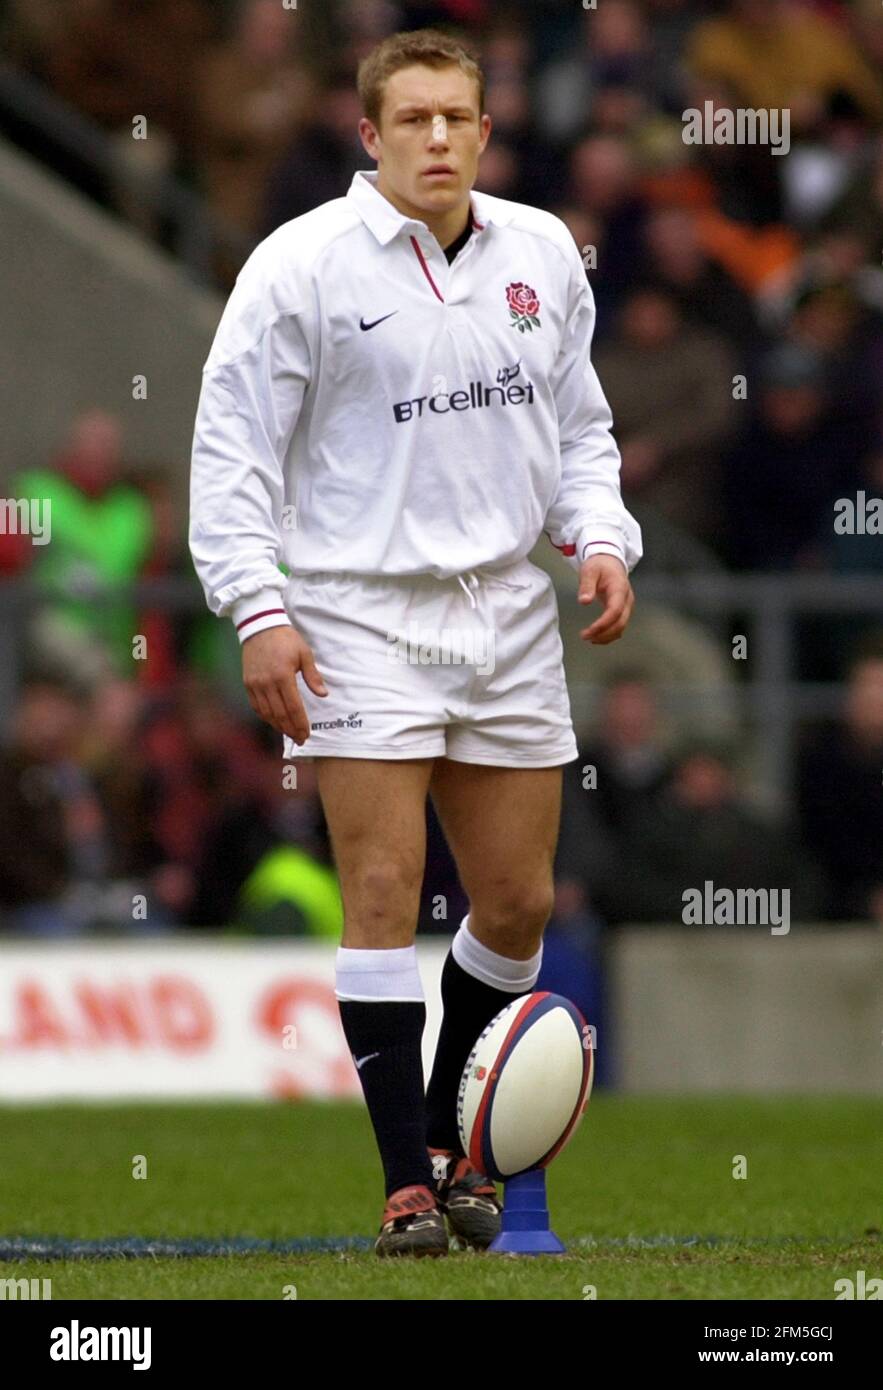 SIX NATIONS RUGBY UNION 2001 ANGLETERRE V ECOSSE MARS 2001 Banque D'Images